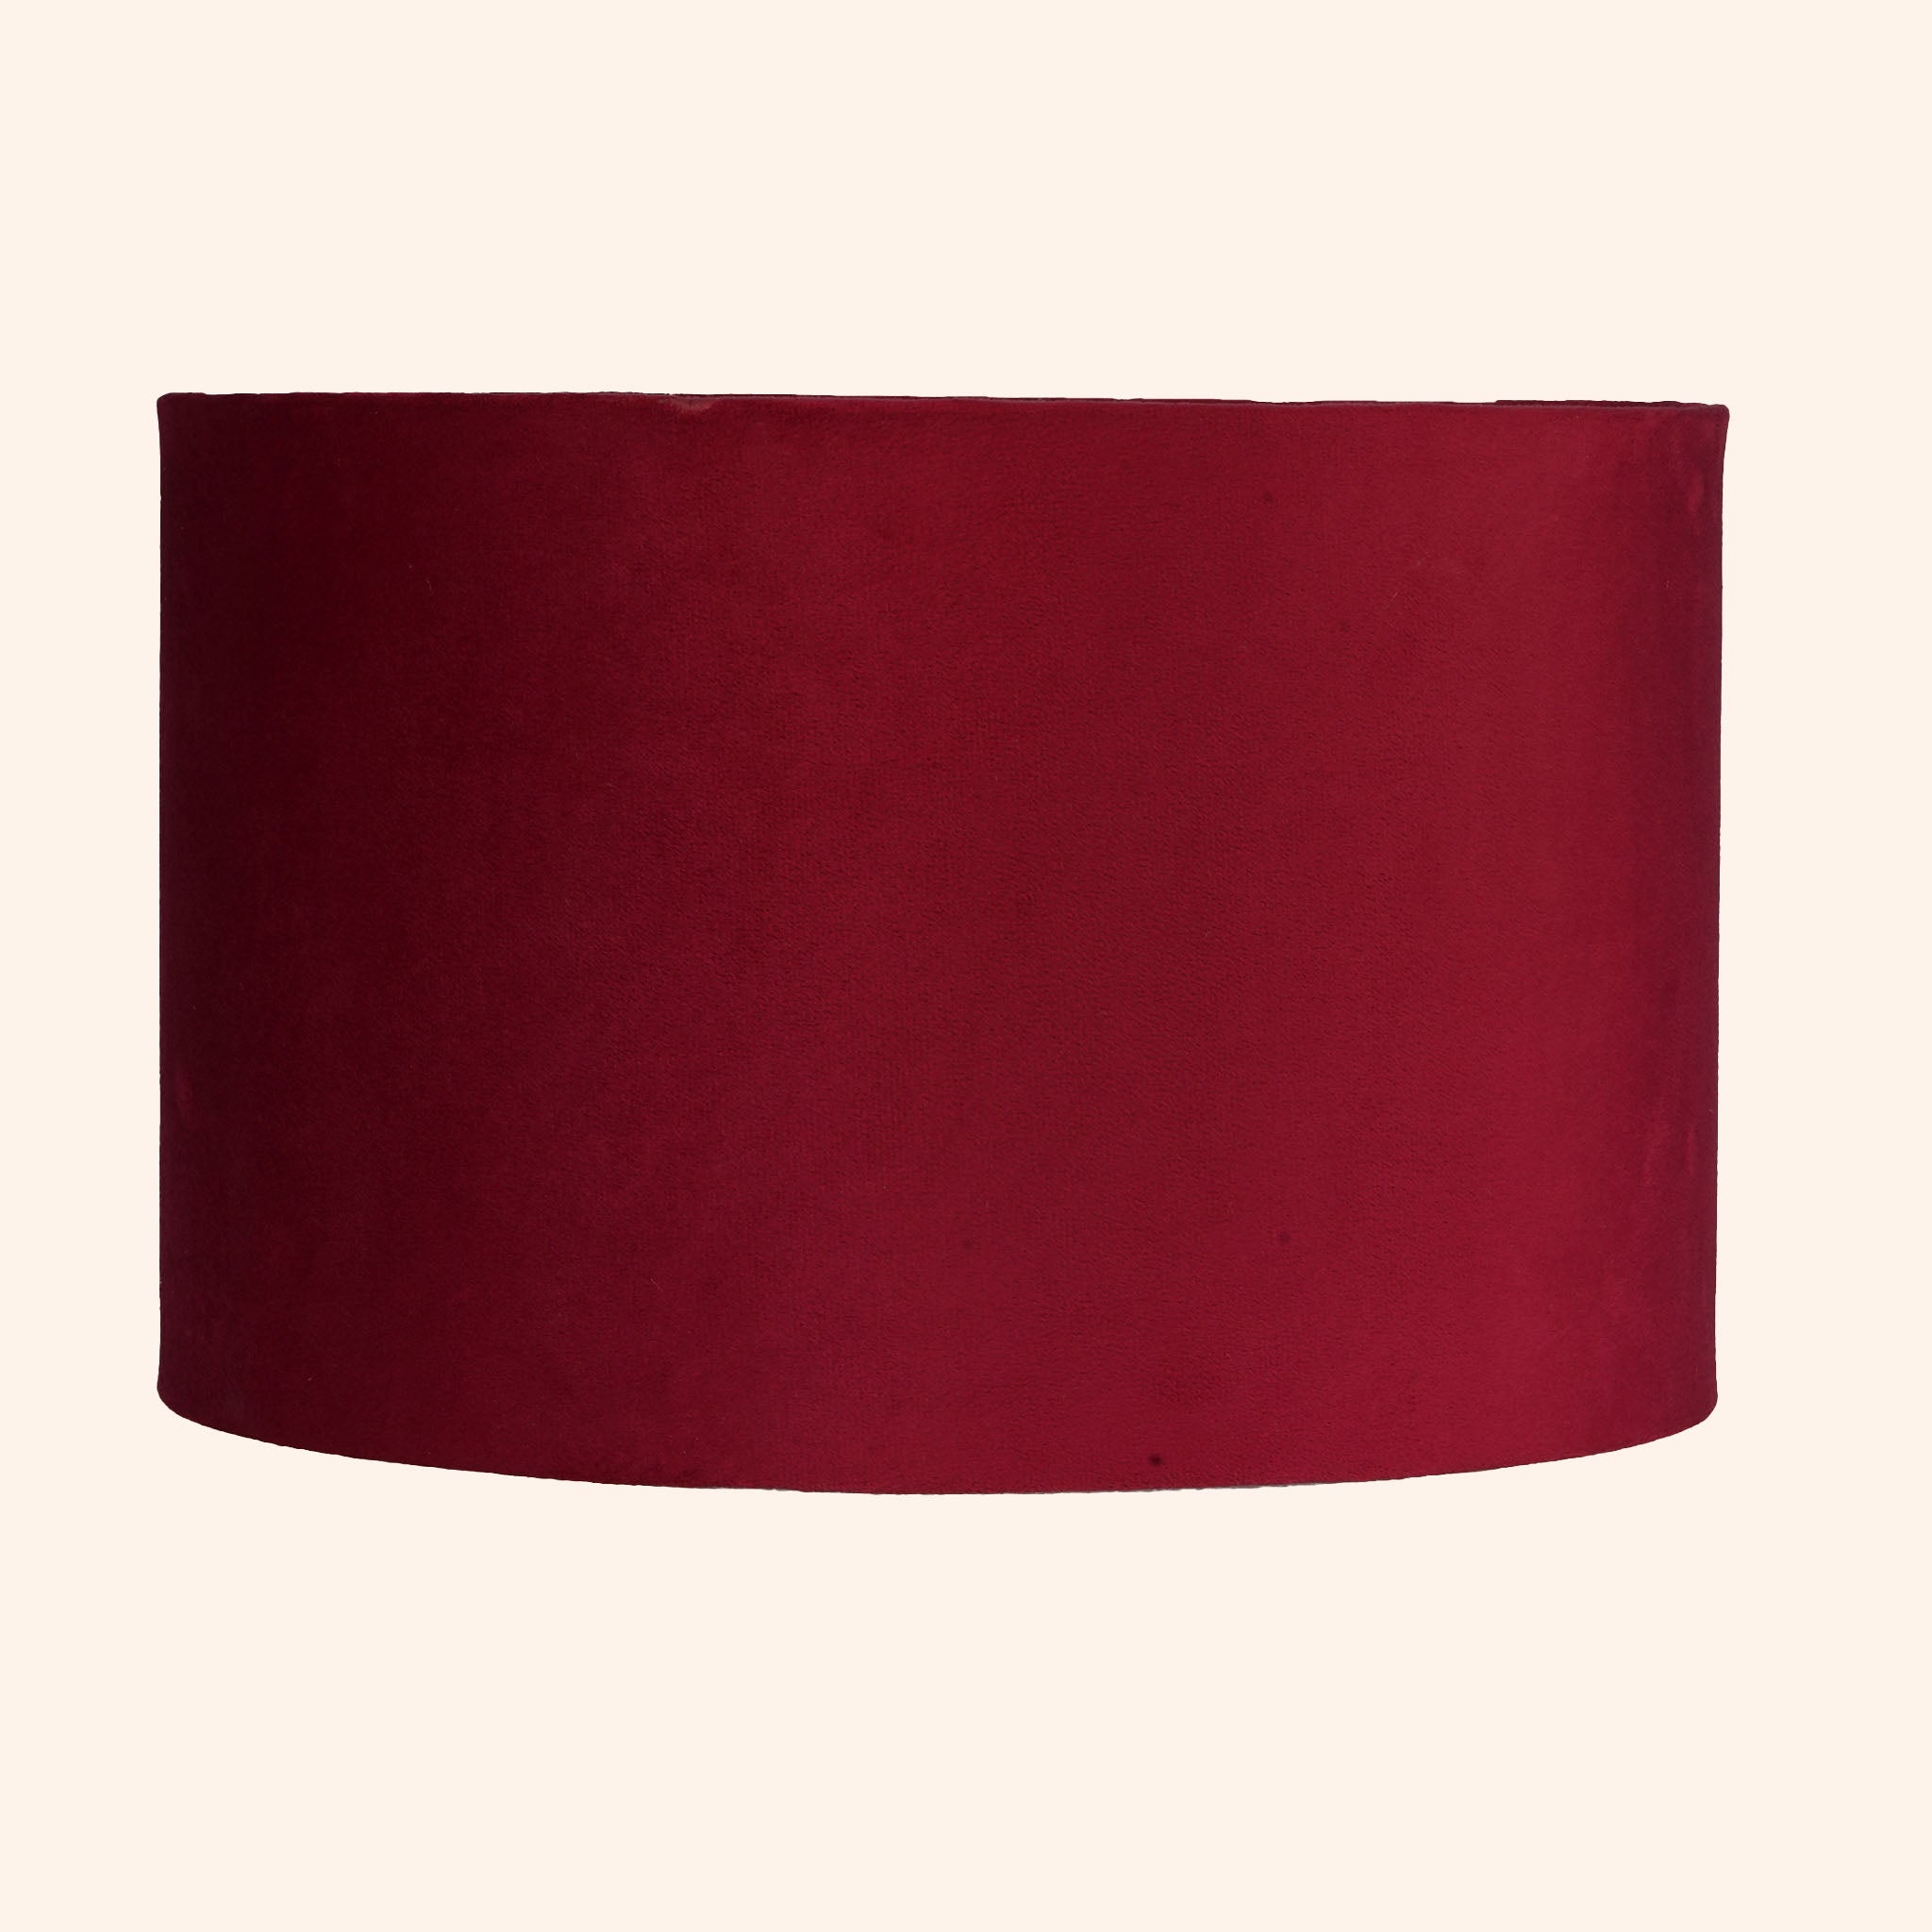 Drum shape lamp shade in red color.